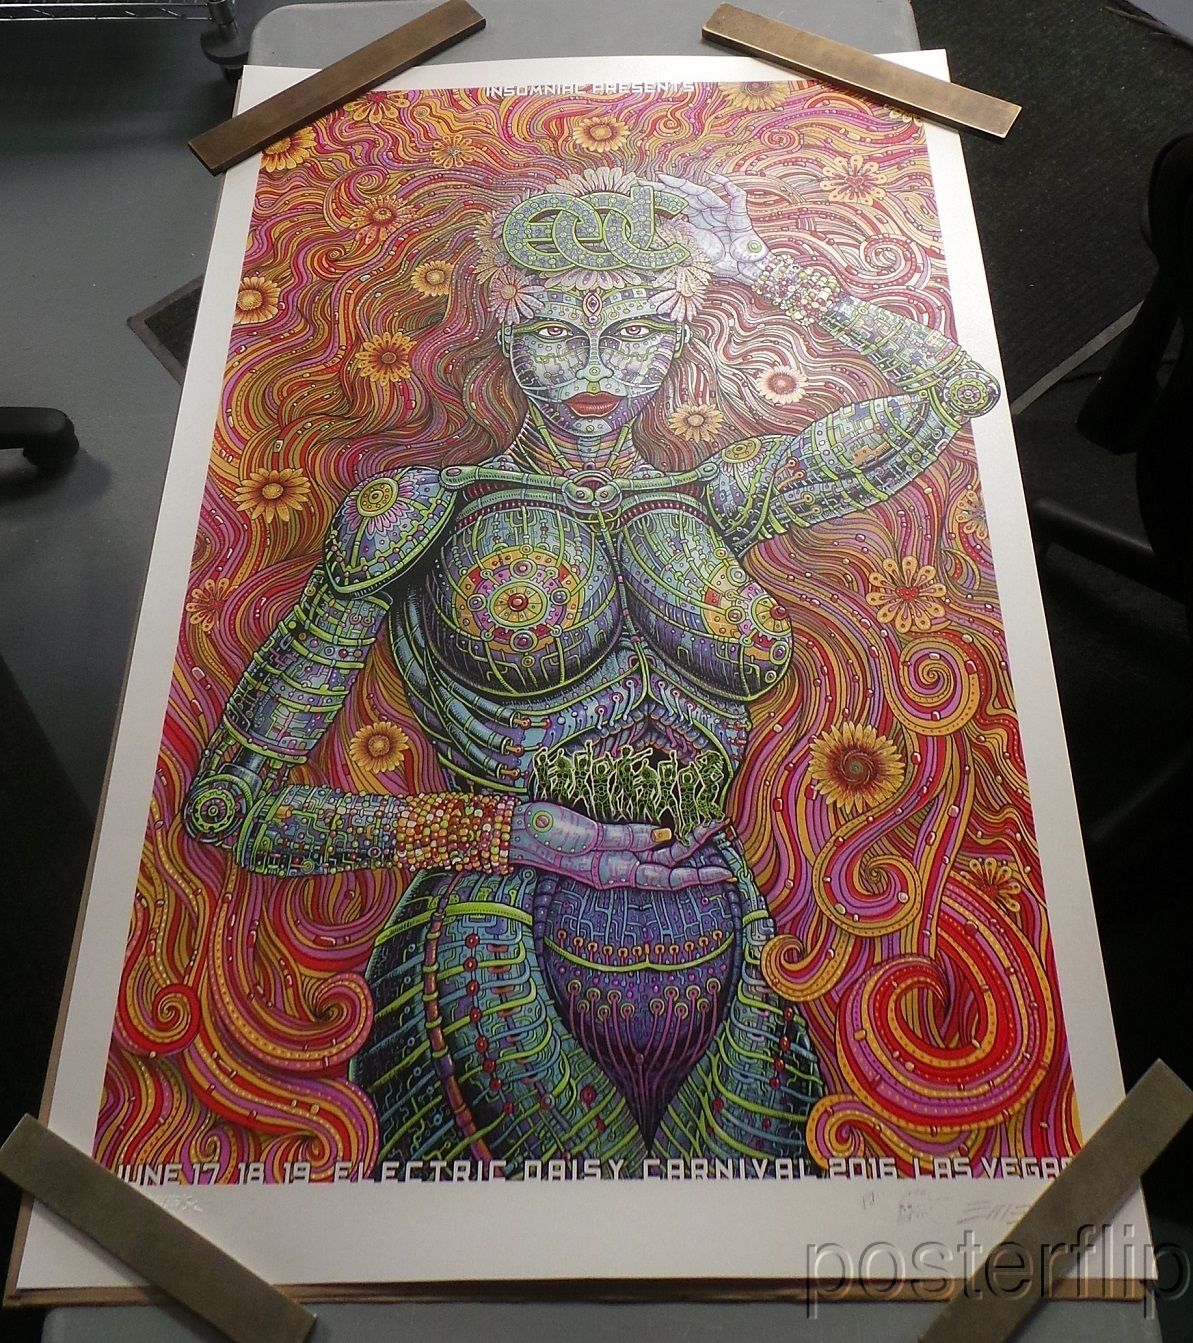 Title:  Electric Daisy Carnival 2016  Poster artist:  Emek  Edition:  xx/100 s/n  Type:  Screen print  Size:  24" x 36"  Notes:  Released in 2016 by Emek Studios Inc.  Print is stored flat in very good condition. Following purchase, prints are rolled in archival paper and shipped with bubble wrap in sturdy cardboard tubes.   Check out our other listings for more hard-to-find and out-of-print posters.